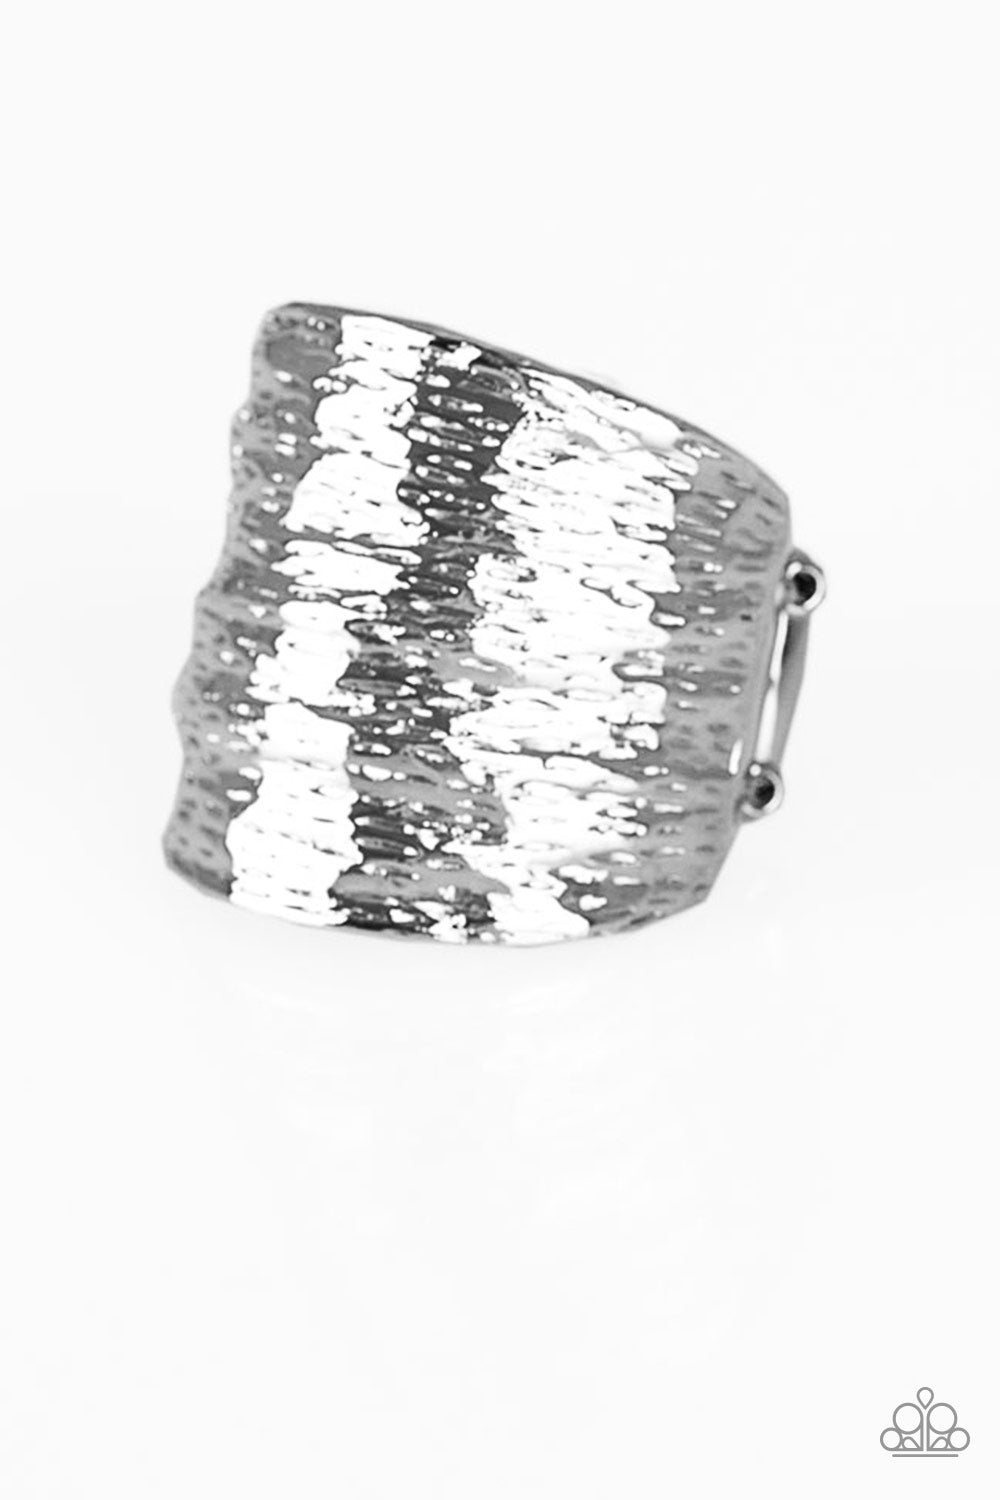 Paleo Patterns - Silver Ring - Flexible Fit - Paparazzi Accessories - Radiating with patterns derived from nature, a rippling silver frame curves around the finger for a bold look. Features a stretchy band for a flexible fit. Sold as one individual ring.